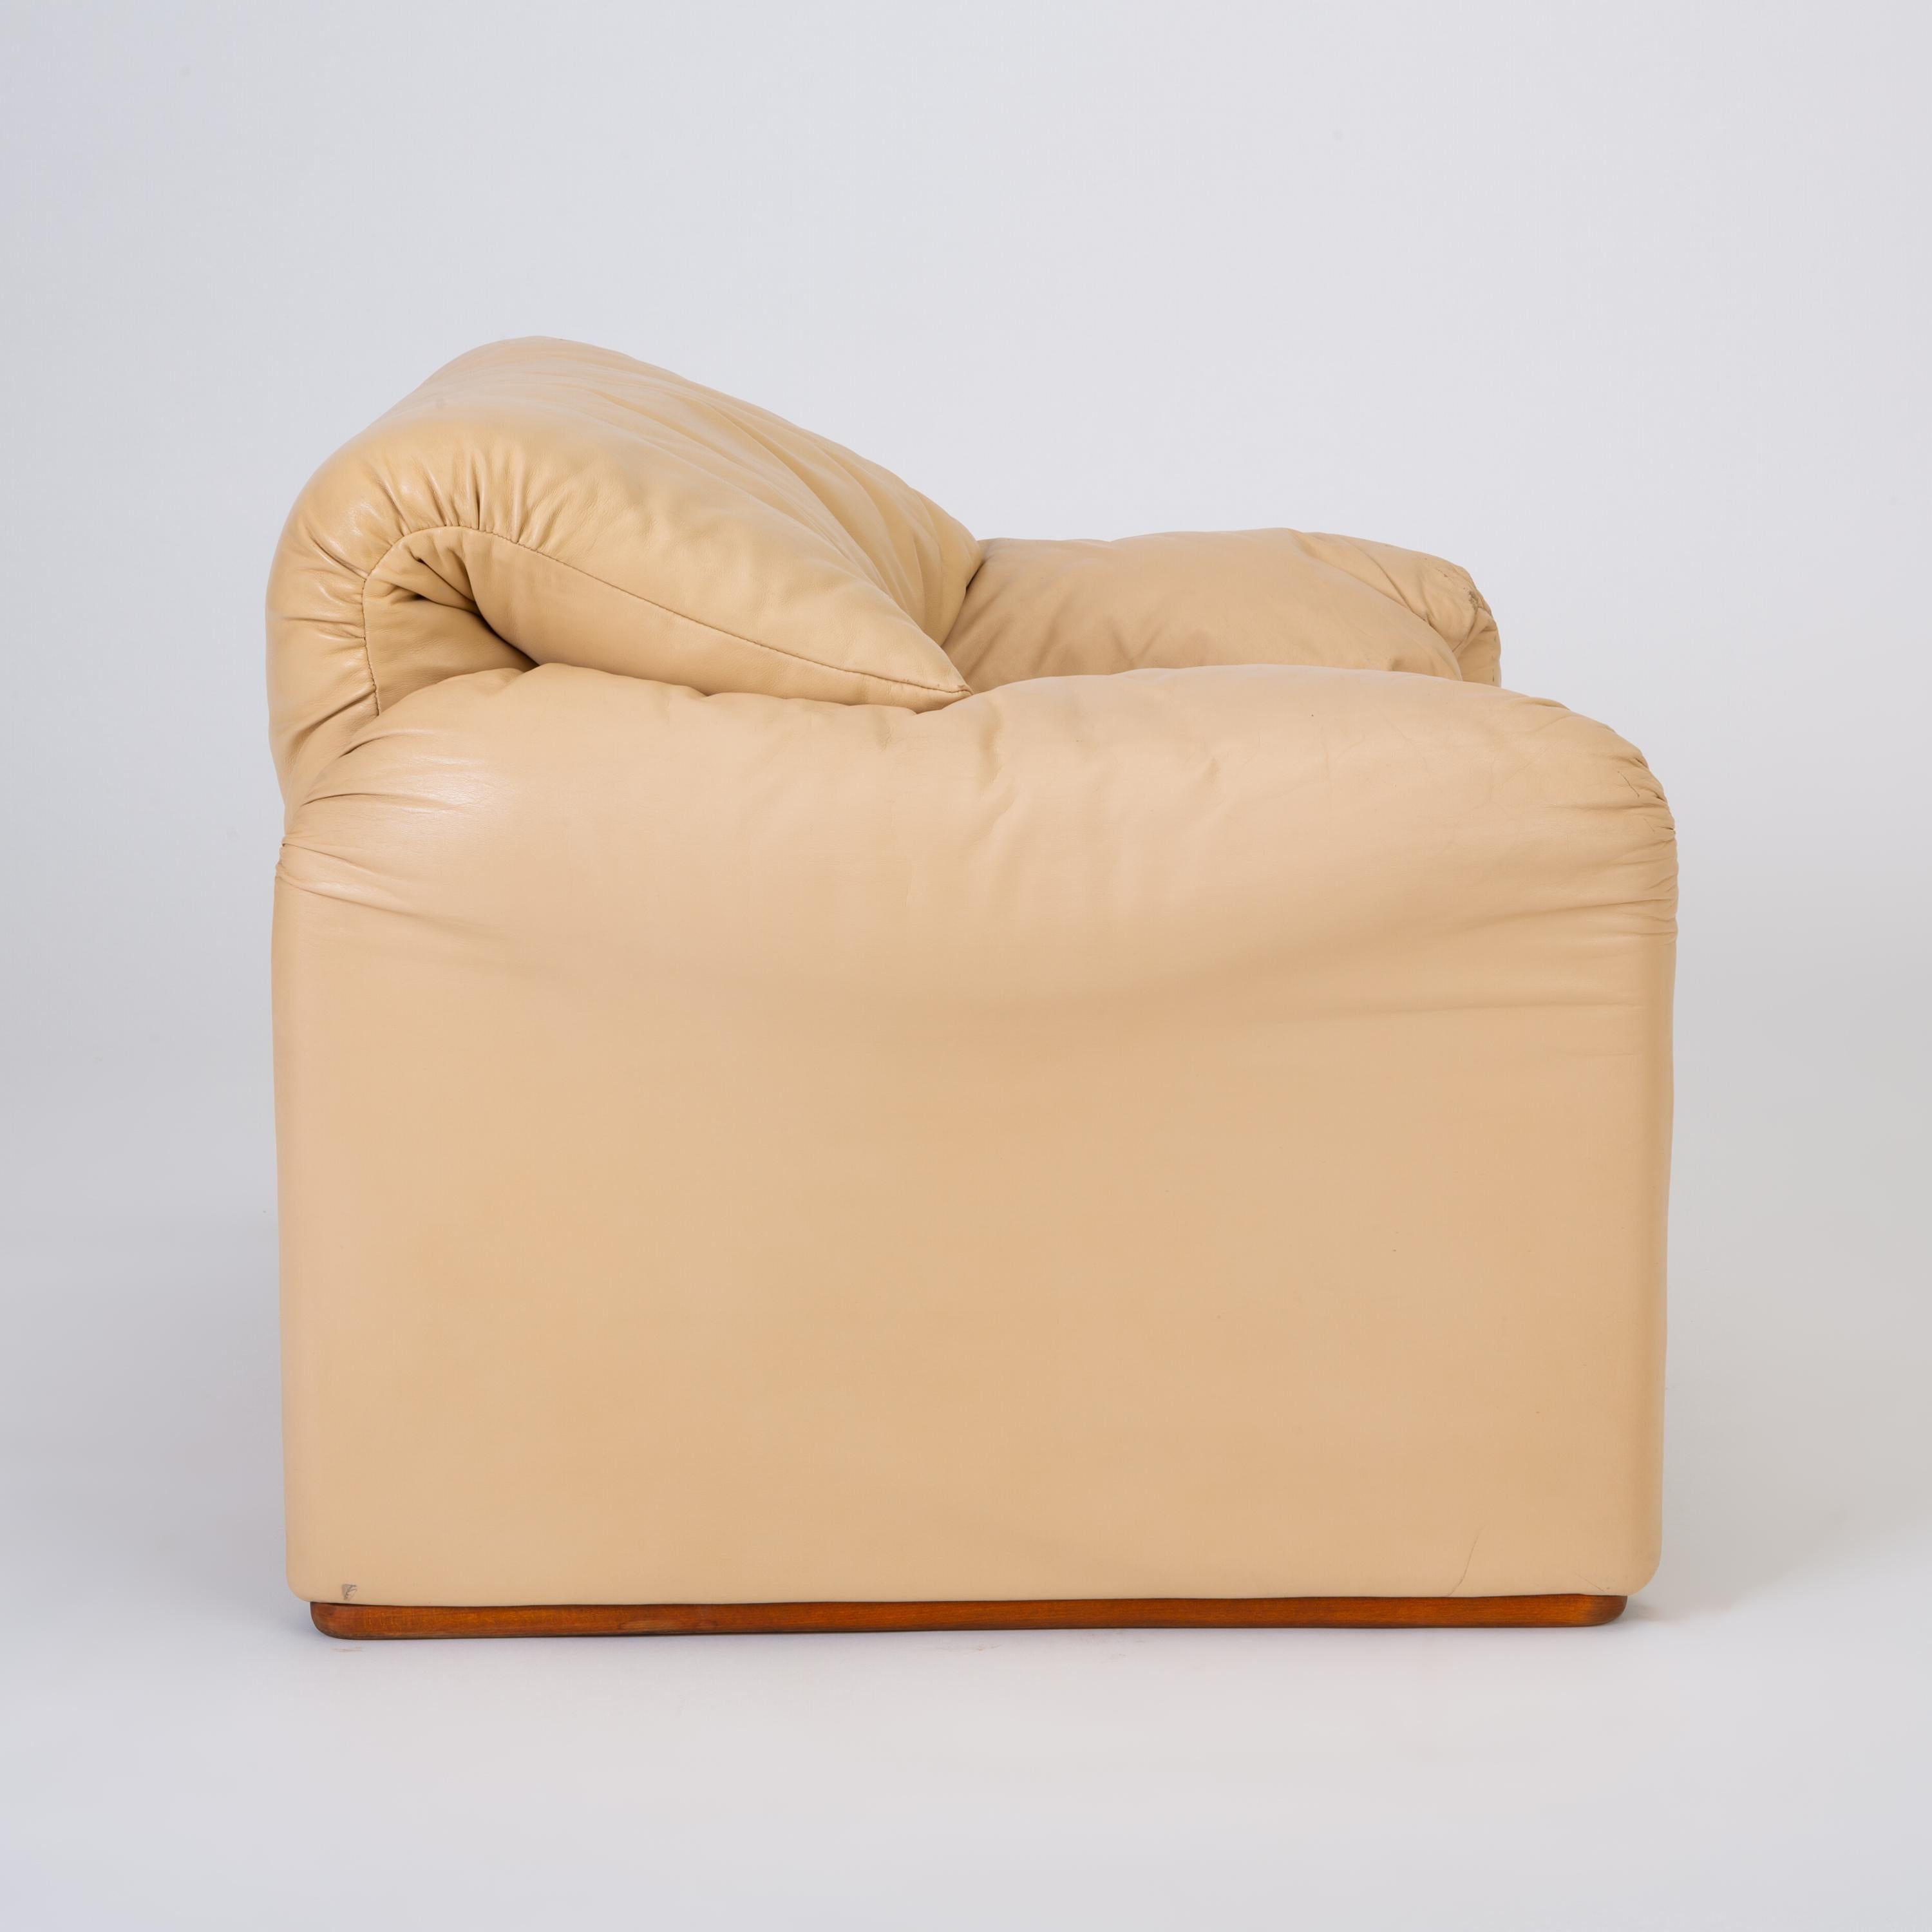 Leather “Maralunga” Chair by Vico Magistretti for Cassina 5